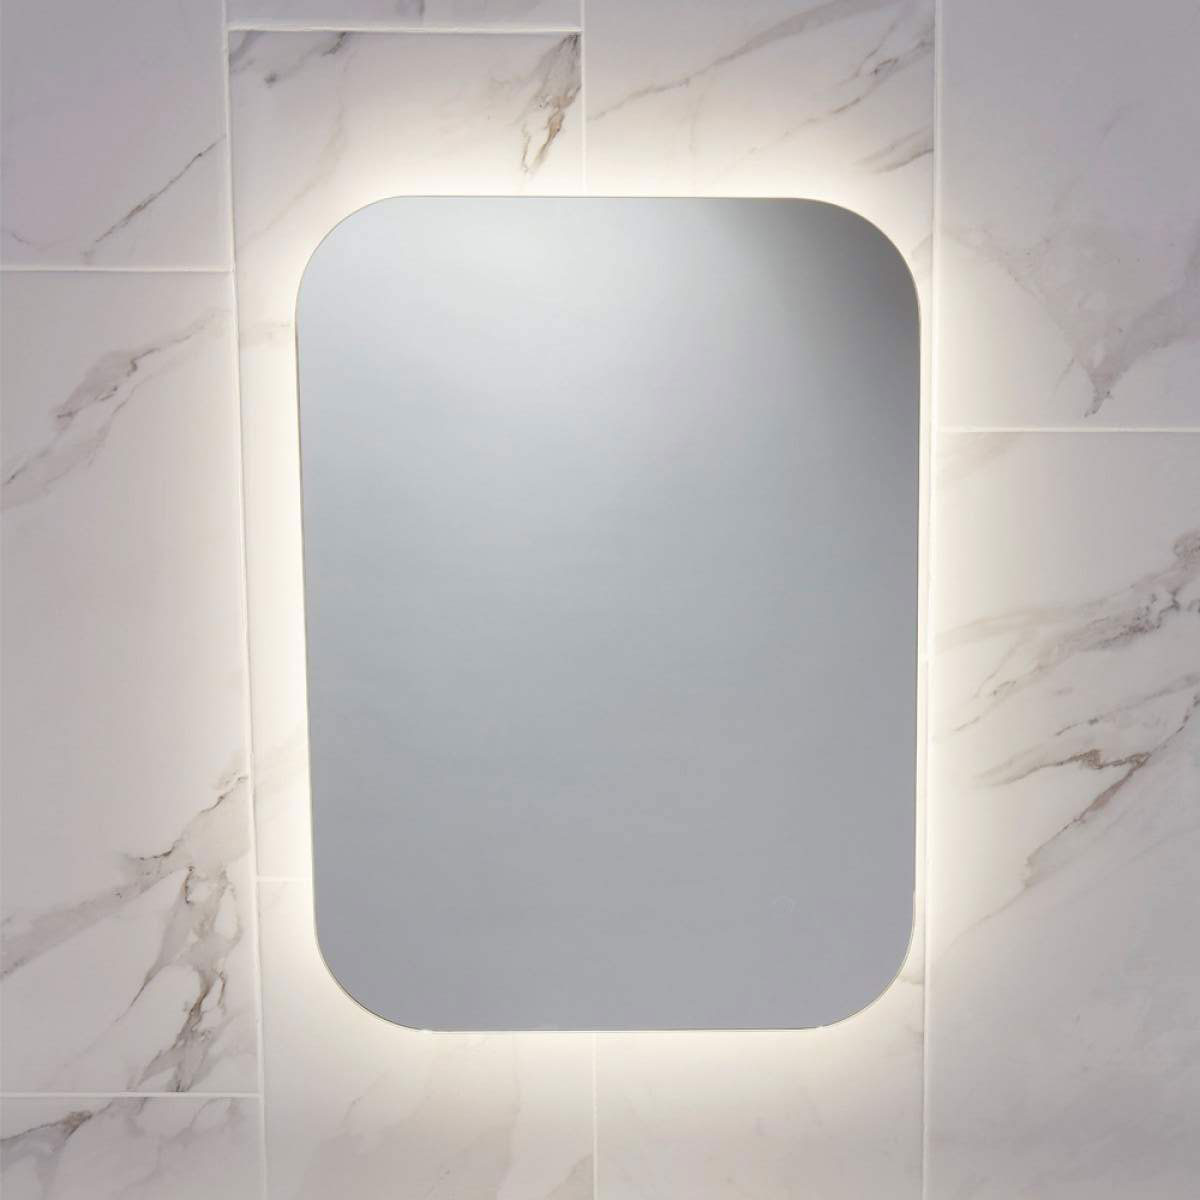 Aura 500 x 700mm LED Mirror with Demister Pad (14333) Image